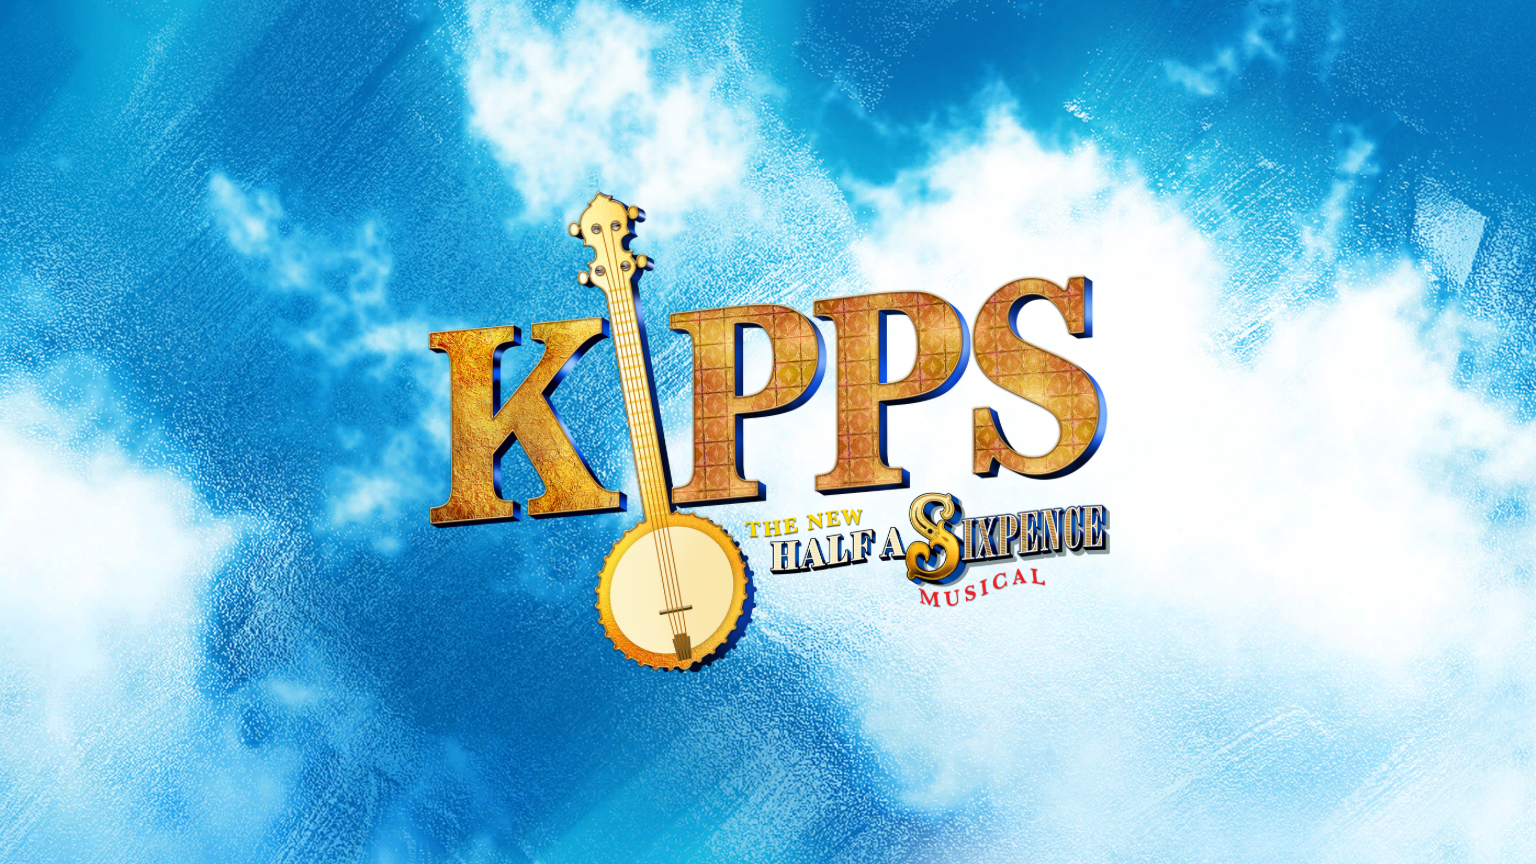 Cast unveiling: KIPPS – The New Half A Sixpence Musical